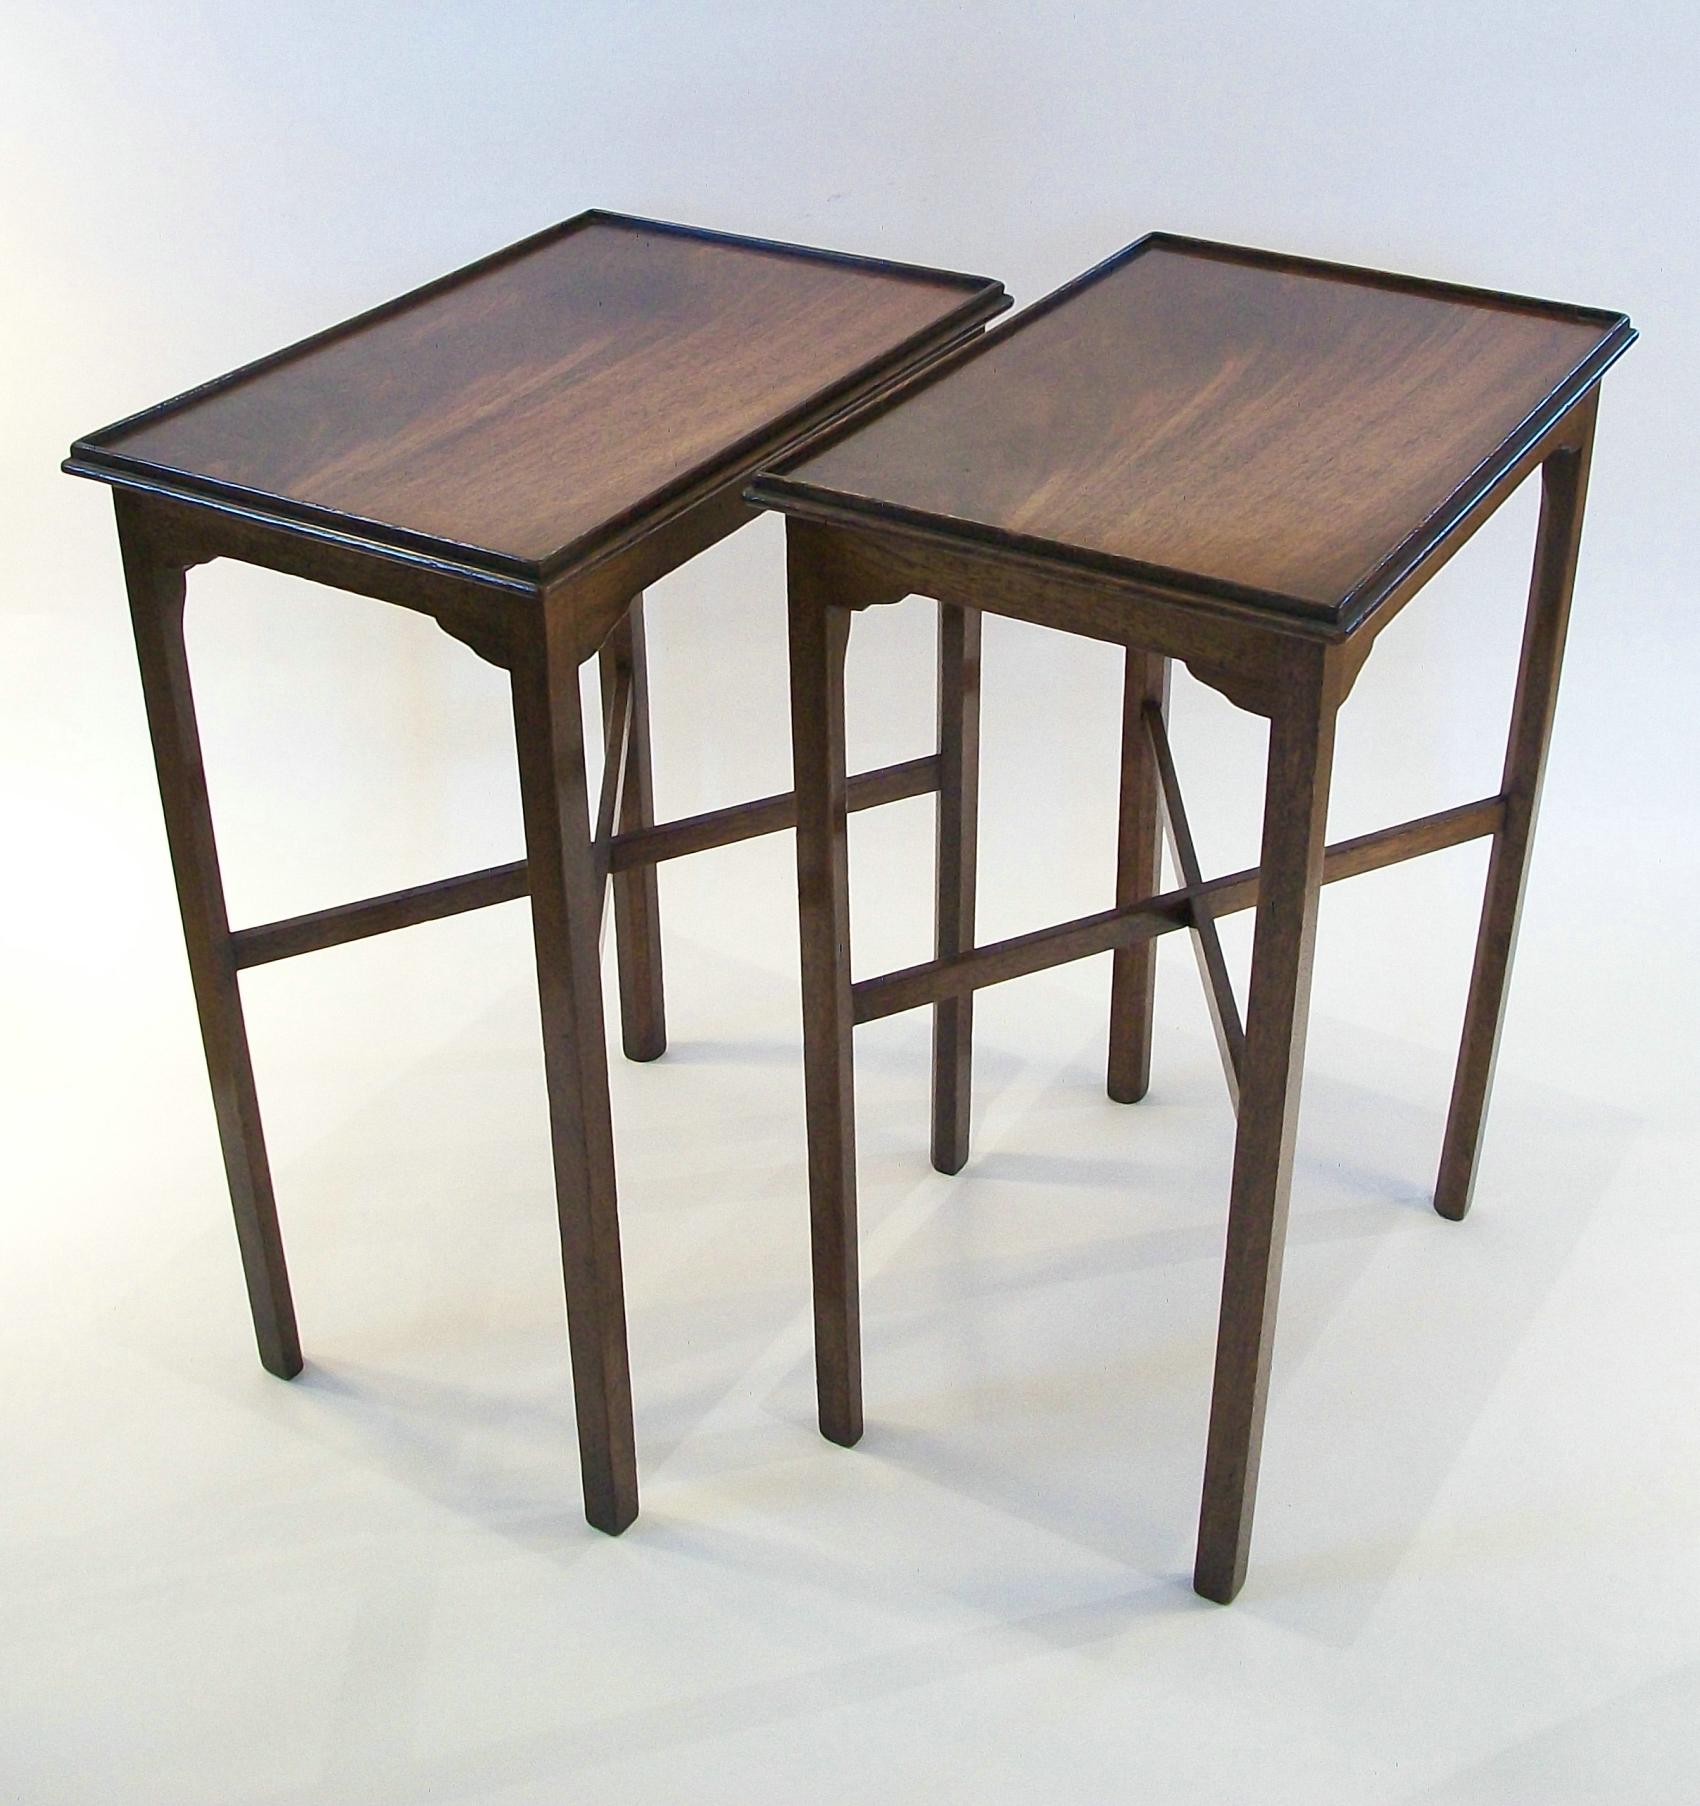 Fine Pair of Georgian Style Flamed Hardwood Side Tables - U.K. - Circa 1950's In Good Condition For Sale In Chatham, ON